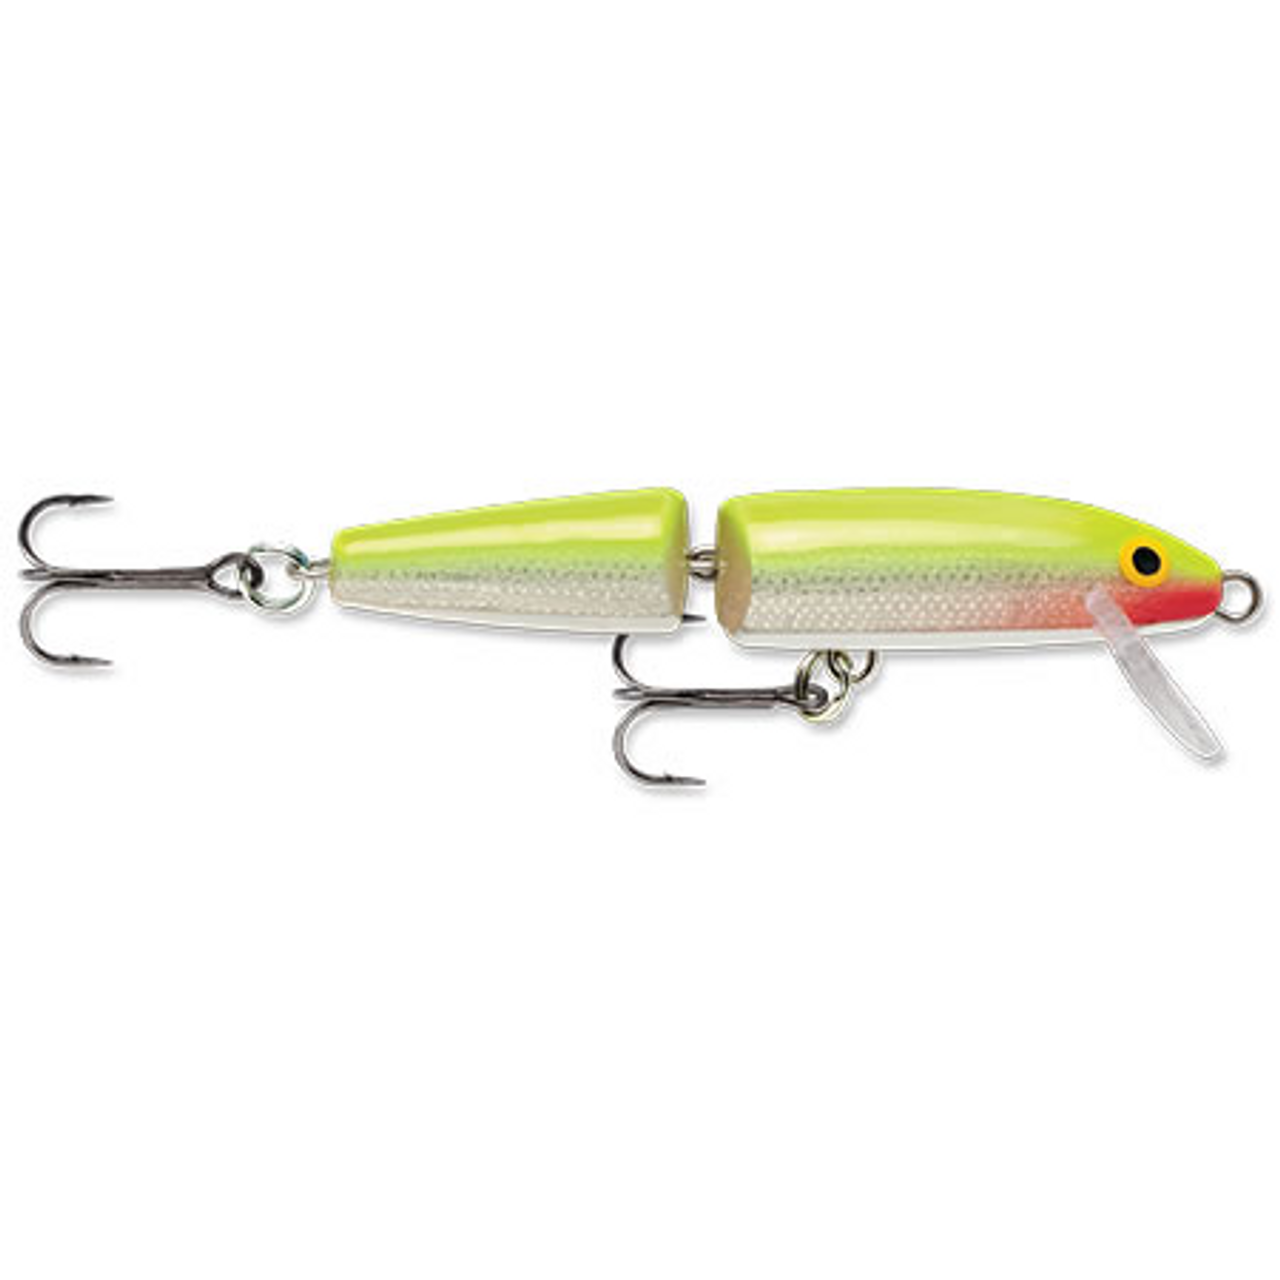 Rapala Jointed Minnow, 3 1/2, 1/4 oz, Silver Fluorescent